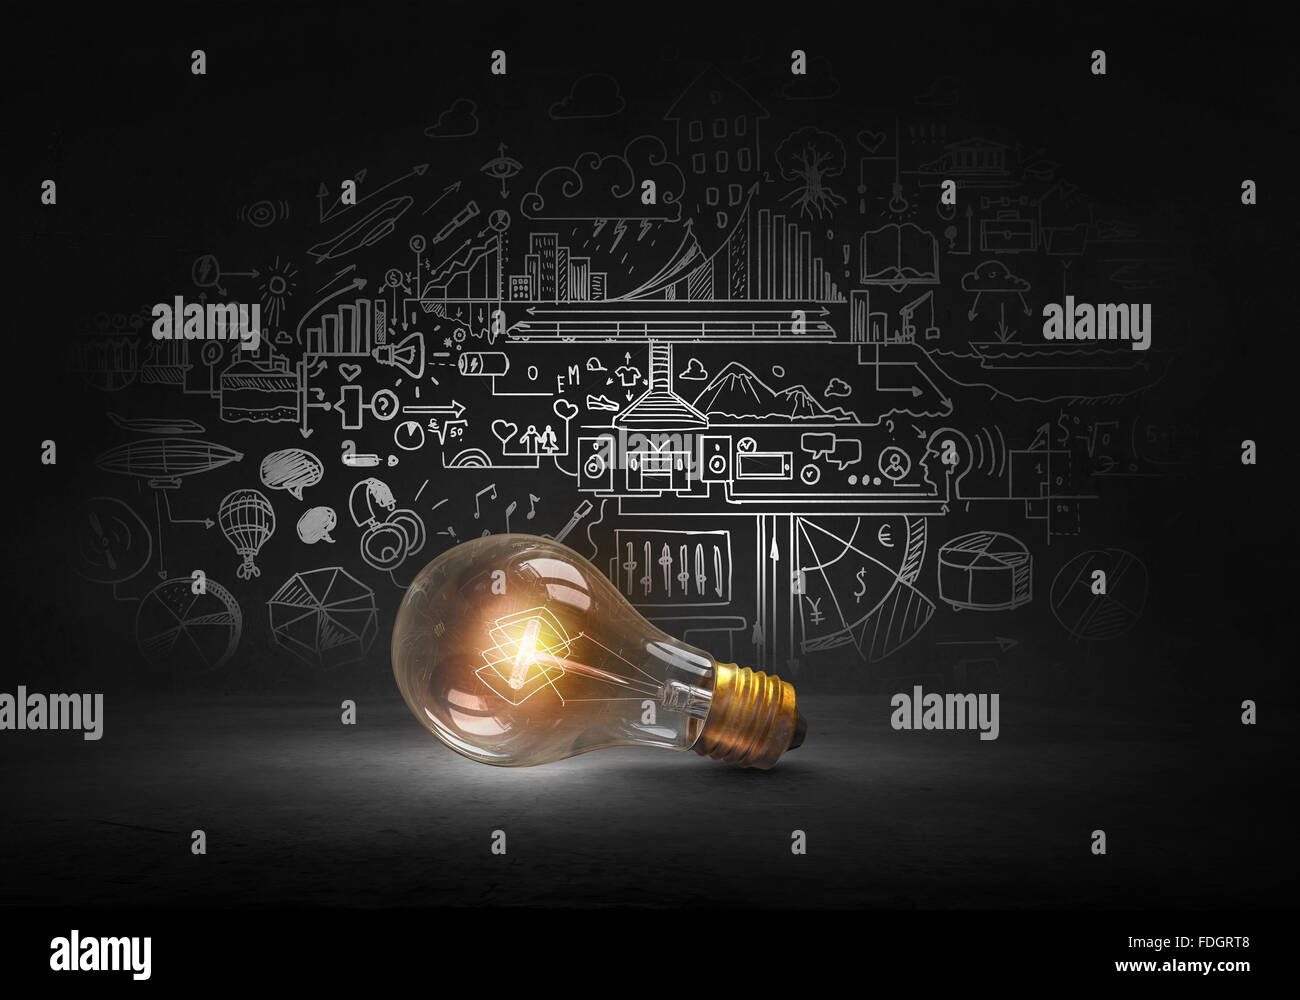 Hanging Glowing Light Bulb In Socket Drawing HighRes Vector Graphic   Getty Images